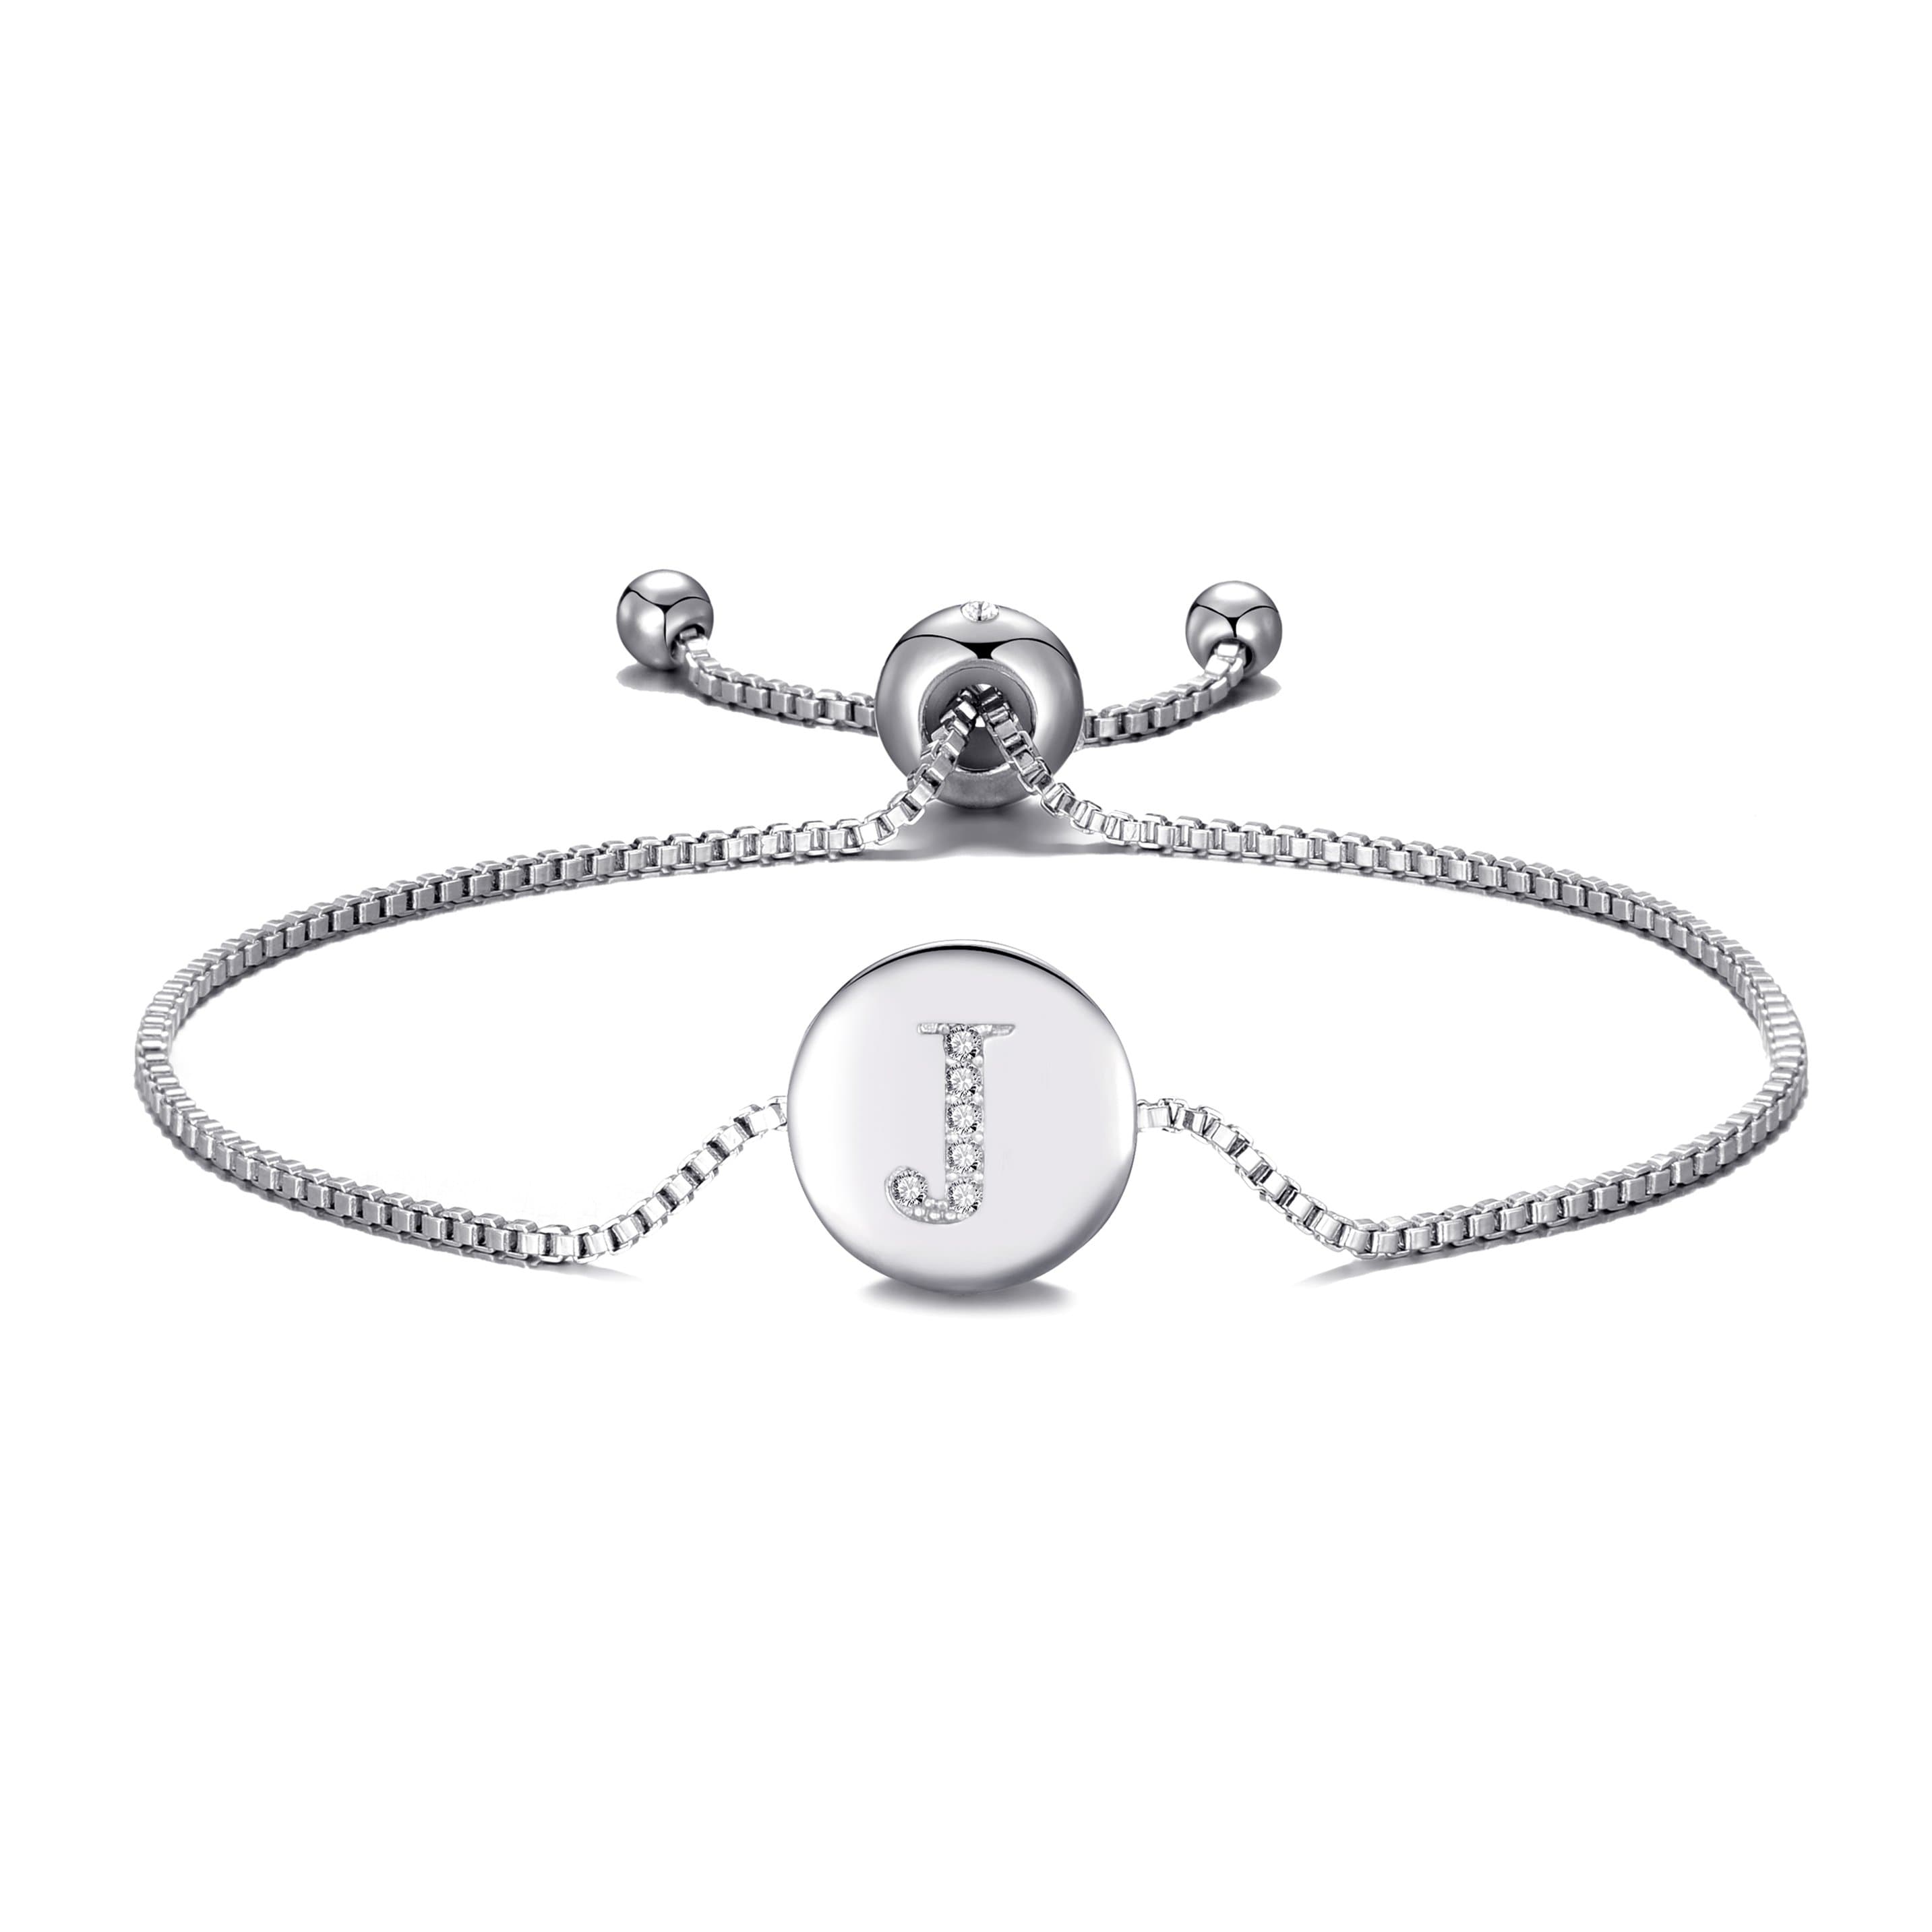 Initial Friendship Bracelet Letter J Created with Zircondia® Crystals